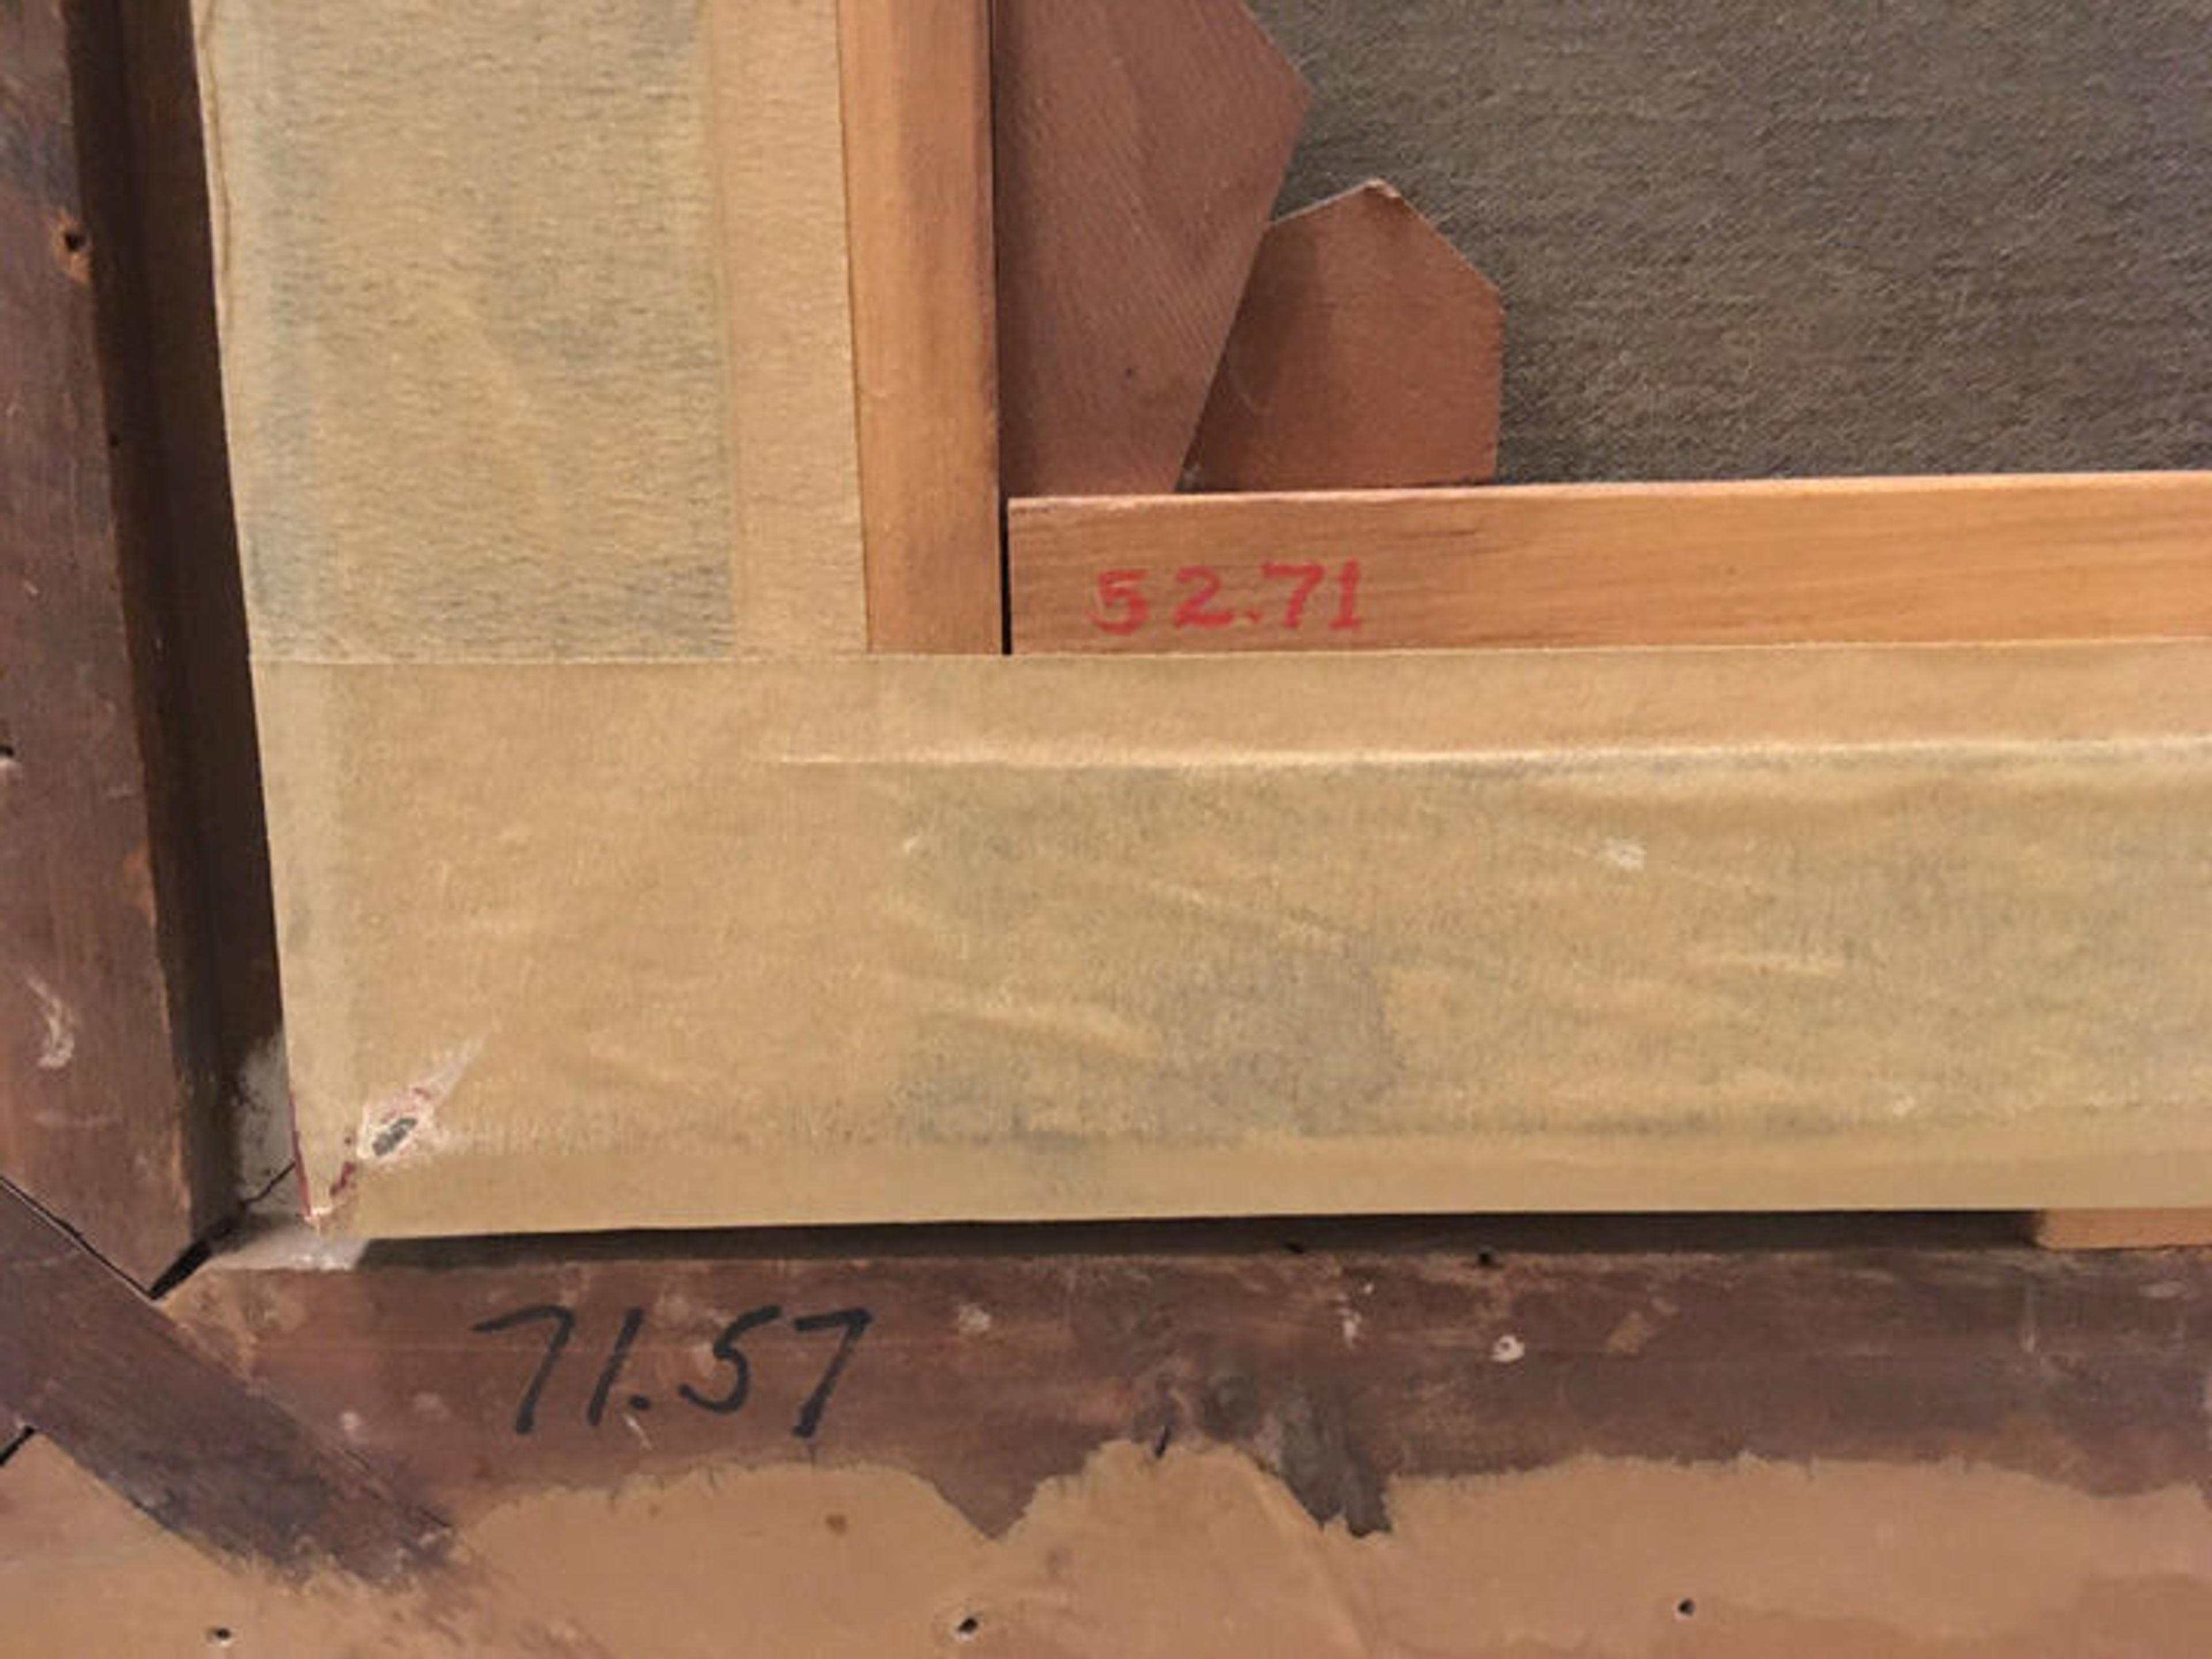 View of the back of a painting frame, showing two different accession numbers